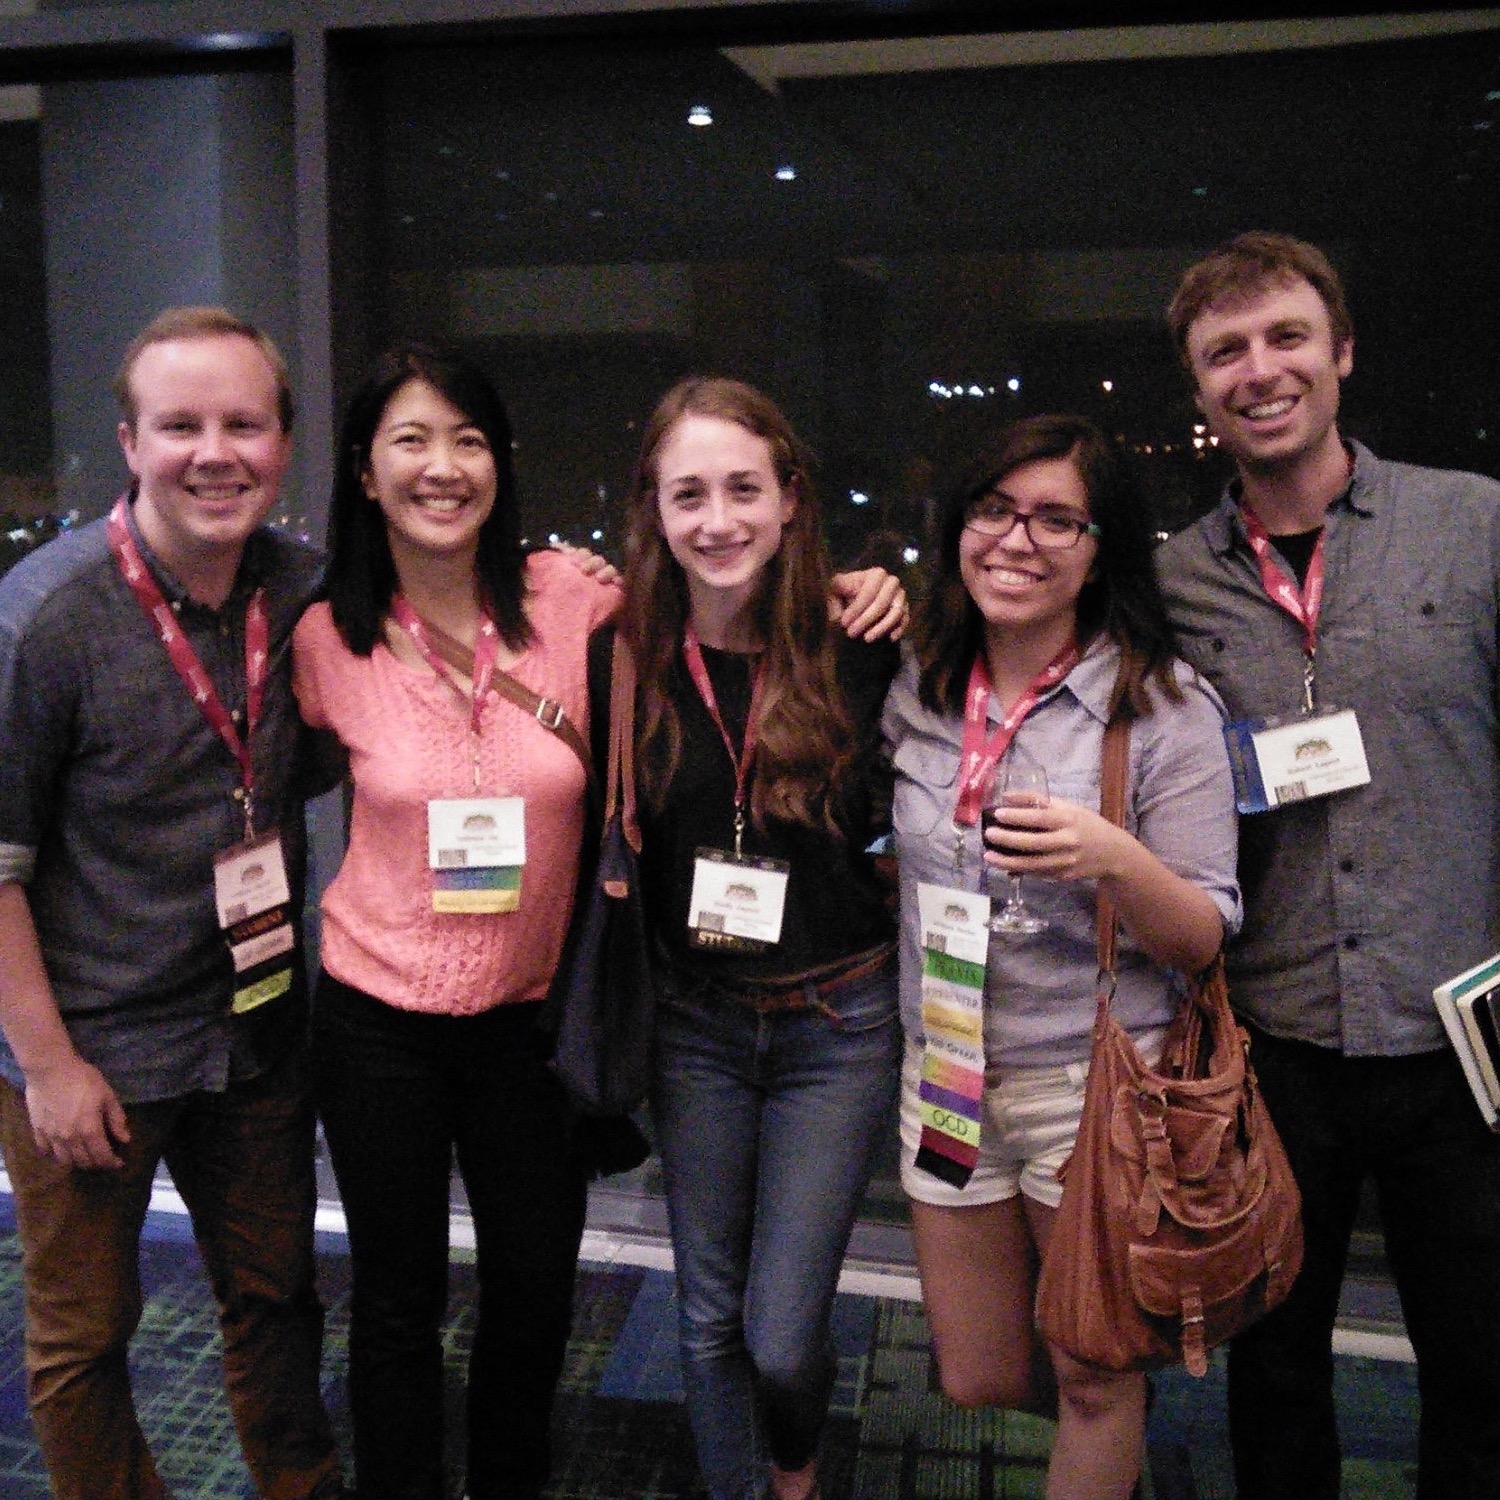 Group photo of William Weaver, Julienne Ng, Shelly Gaynor, Vivianna Sanchez, and Rob Laport.